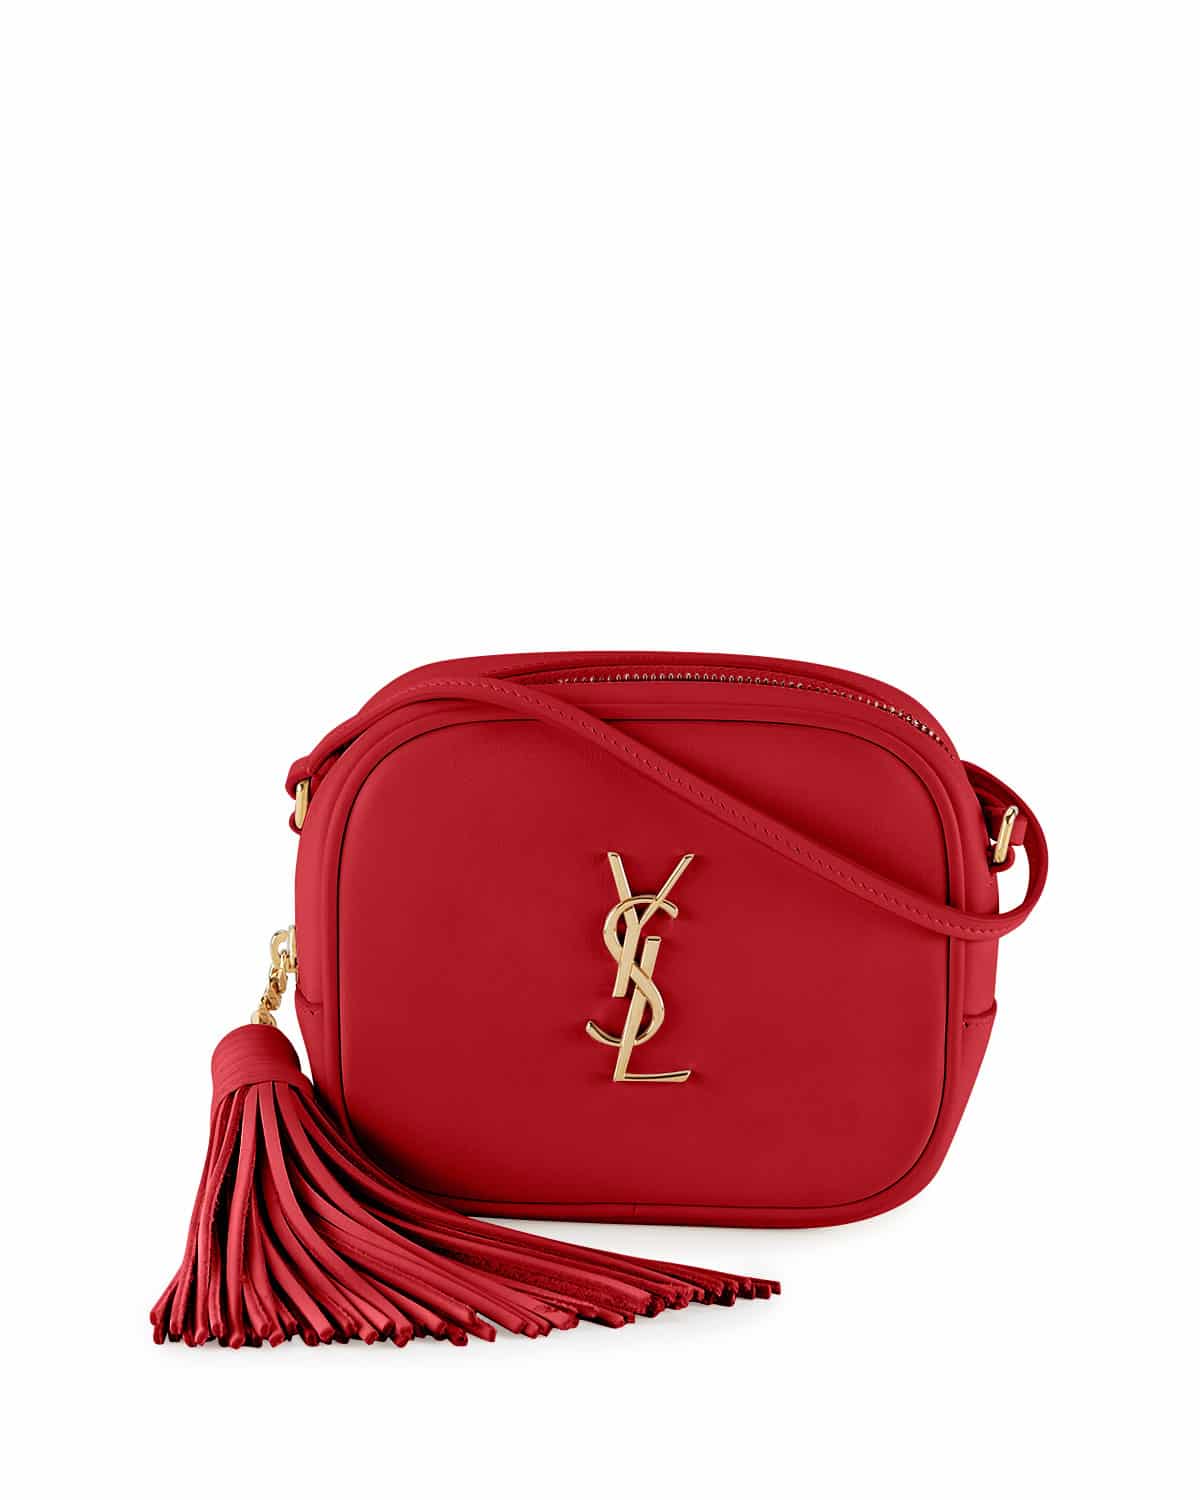 These YSL Pouches For Under £400 Will Make You Fall In